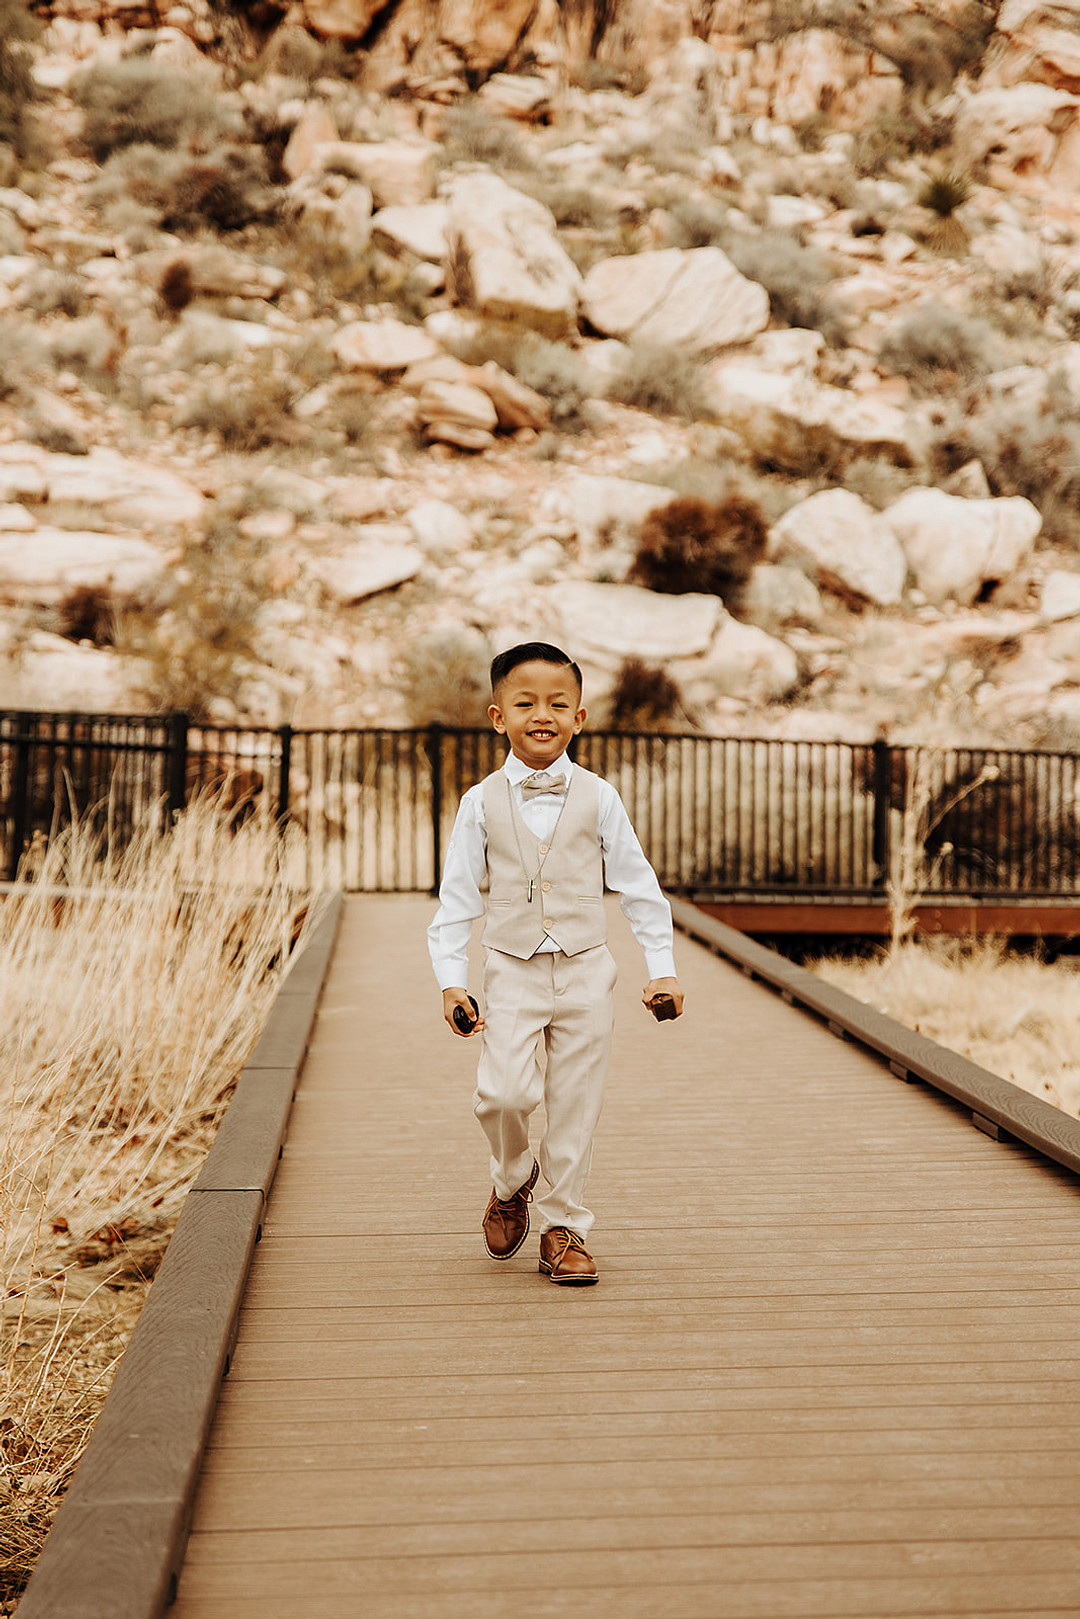 Ring bearer at outdoor wedding wearing a light tan vest, bow tie and pants.